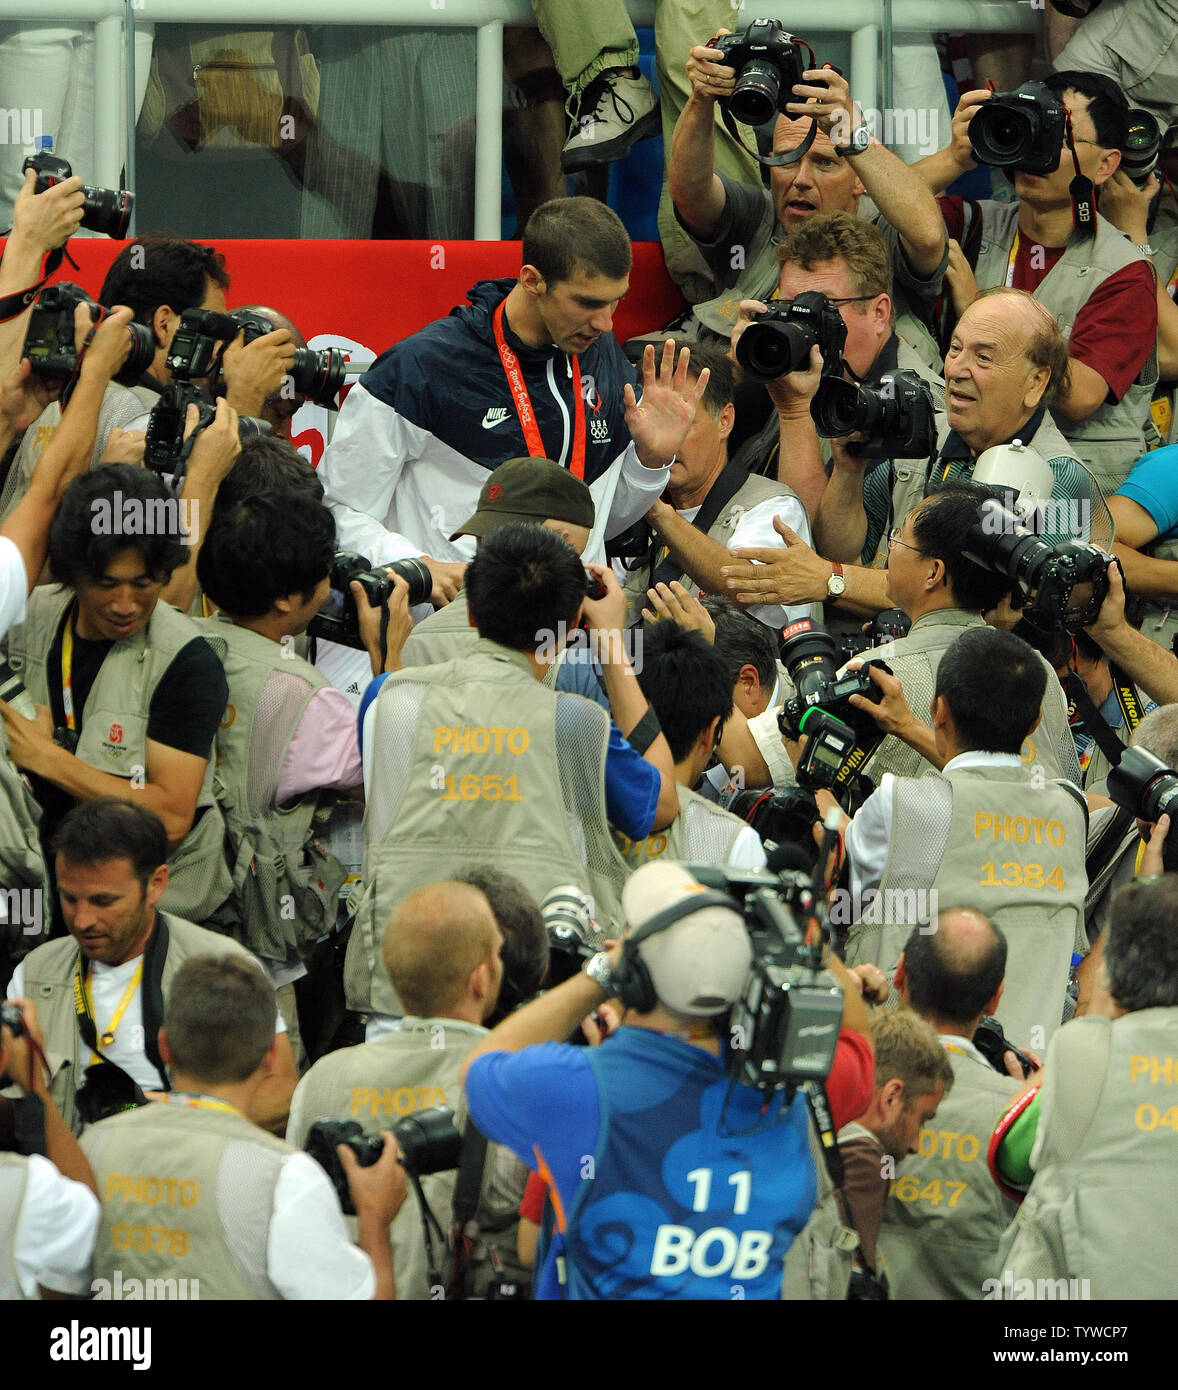 USA's Michael Phelps moves his way through photographers after climbing through them to see his mother and in the stands after the US team received their medals for the Men's 4x100M Medley, setting a world record of 3:29.34, at the National Aquatic Center (Water Cube) during the 2008 Summer Olympics in Beijing, China, on August 17, 2008.  Phelps set the world record for medals in a single Olympics with 8, passing Mark Spitz.    (UPI Photo/Roger L. Wollenberg) Stock Photo